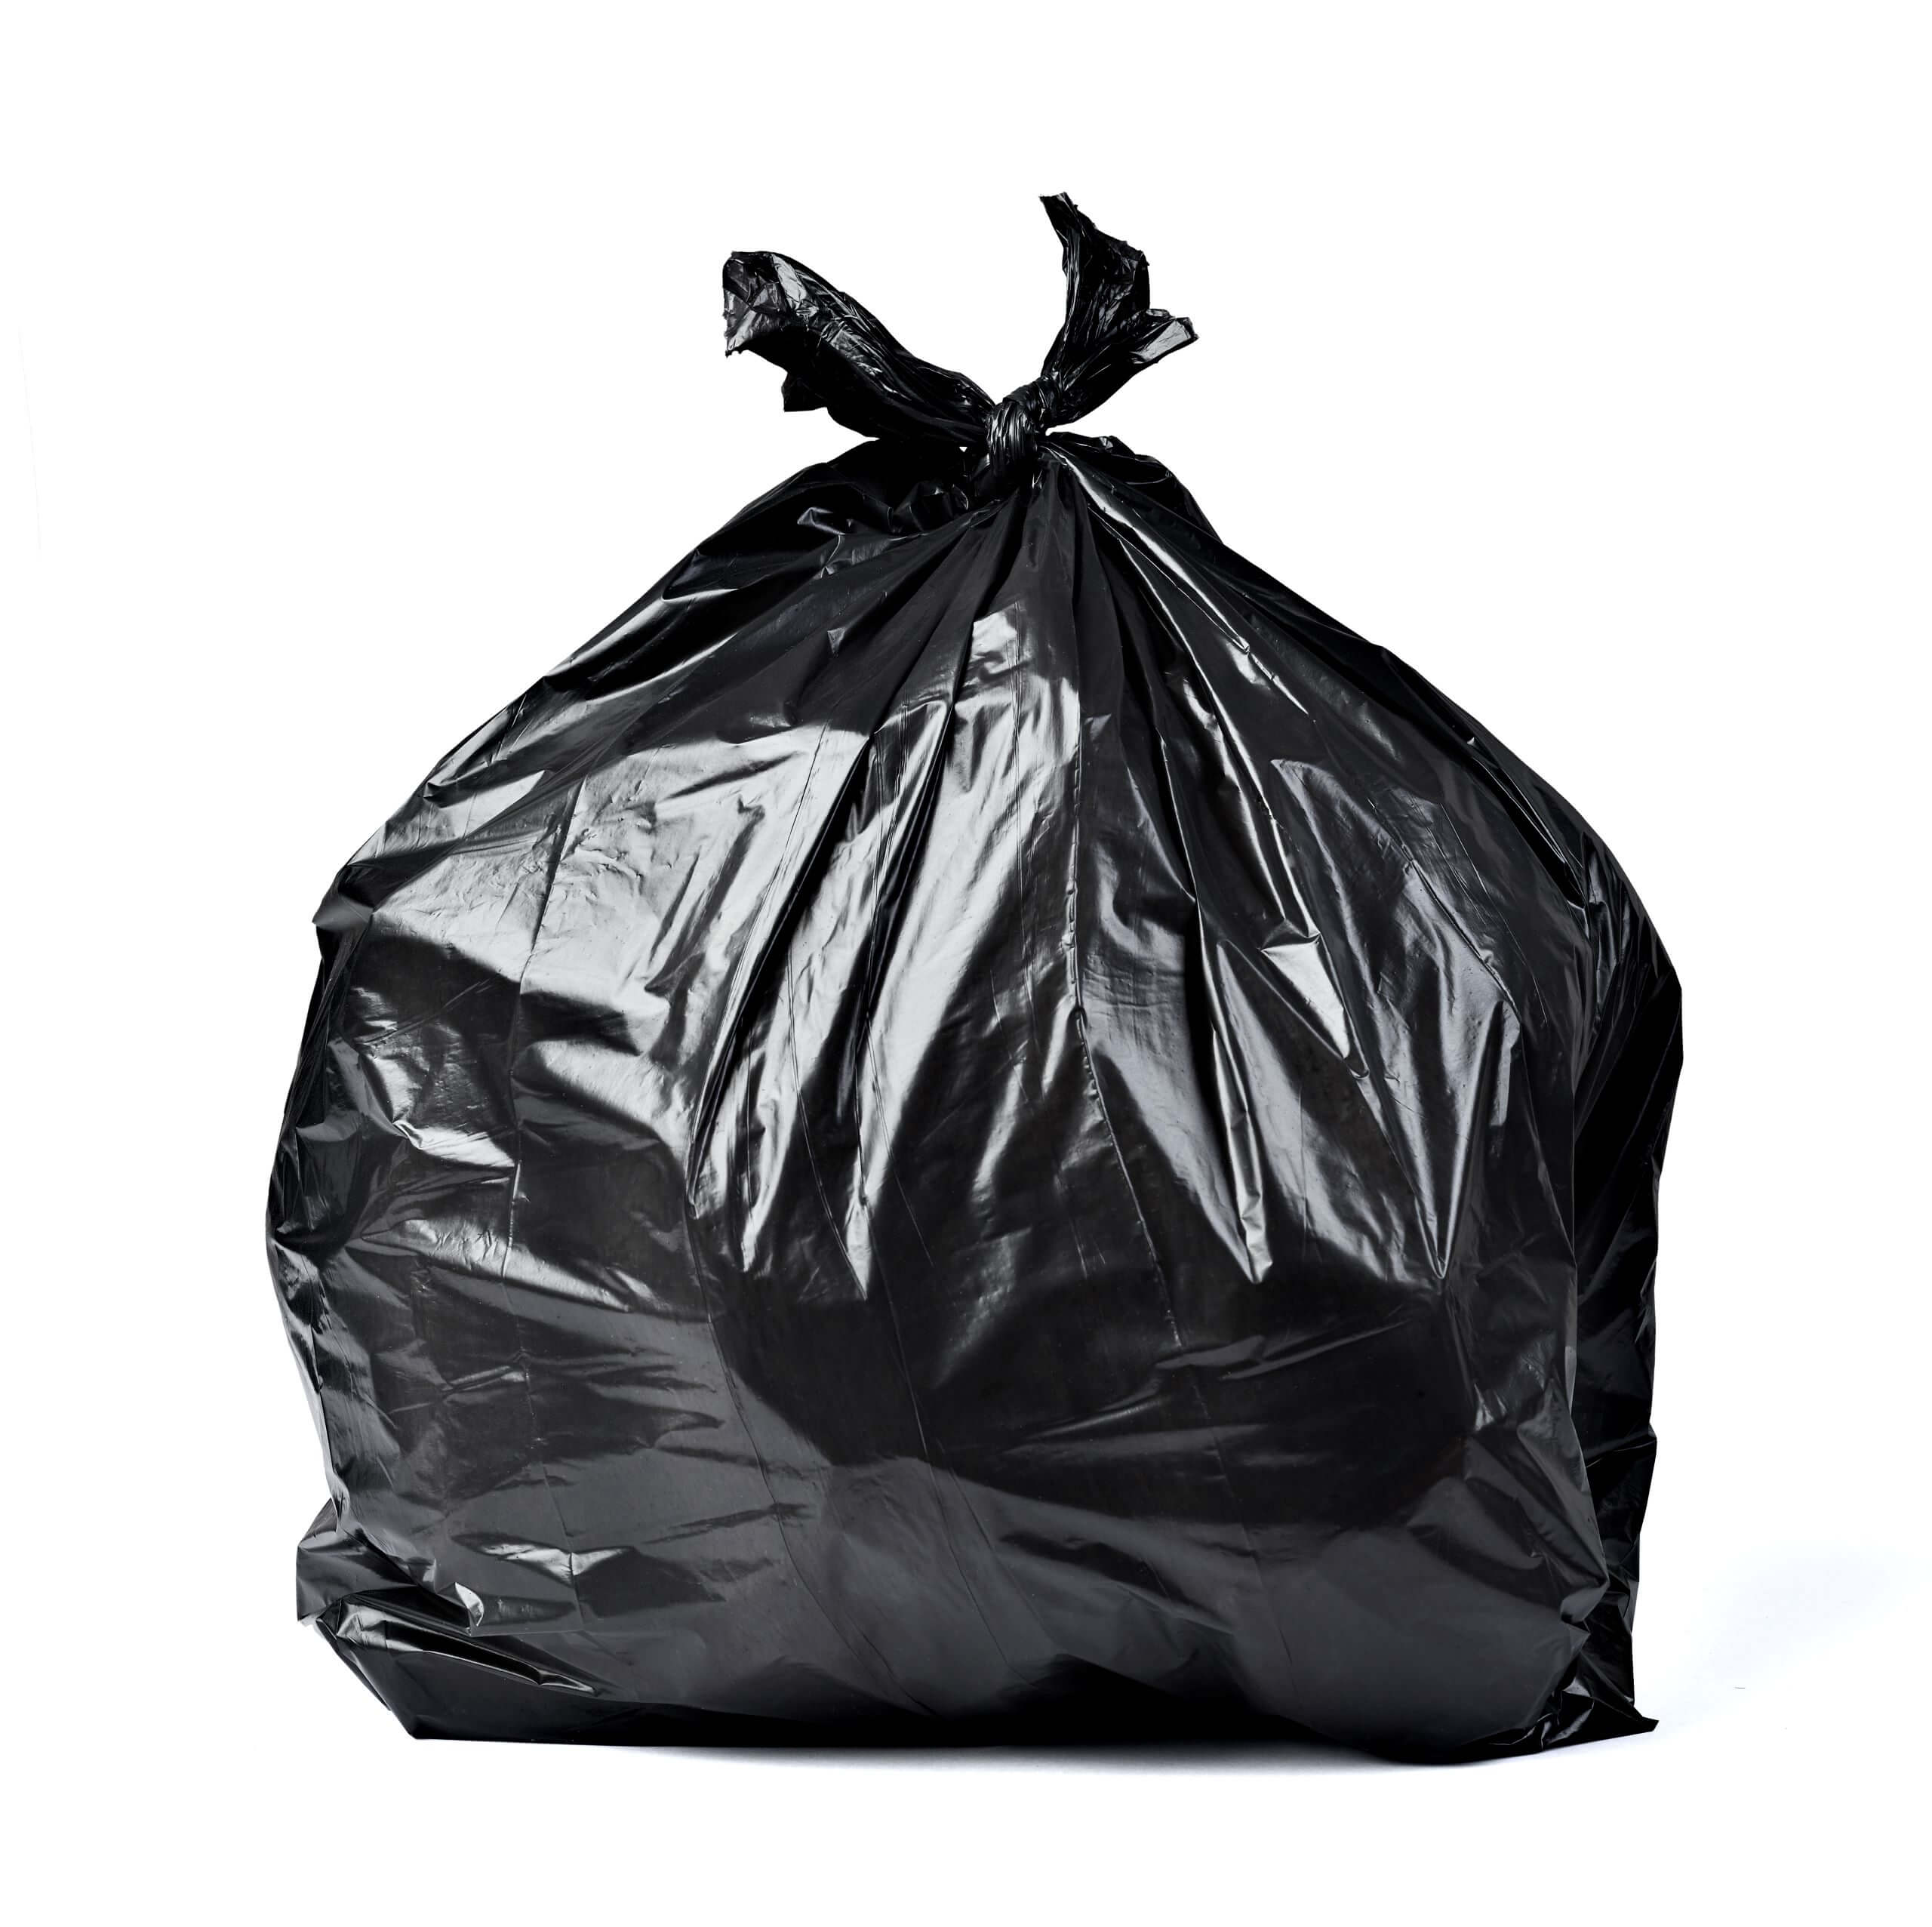 An image of our Rubbish Waste Bags.